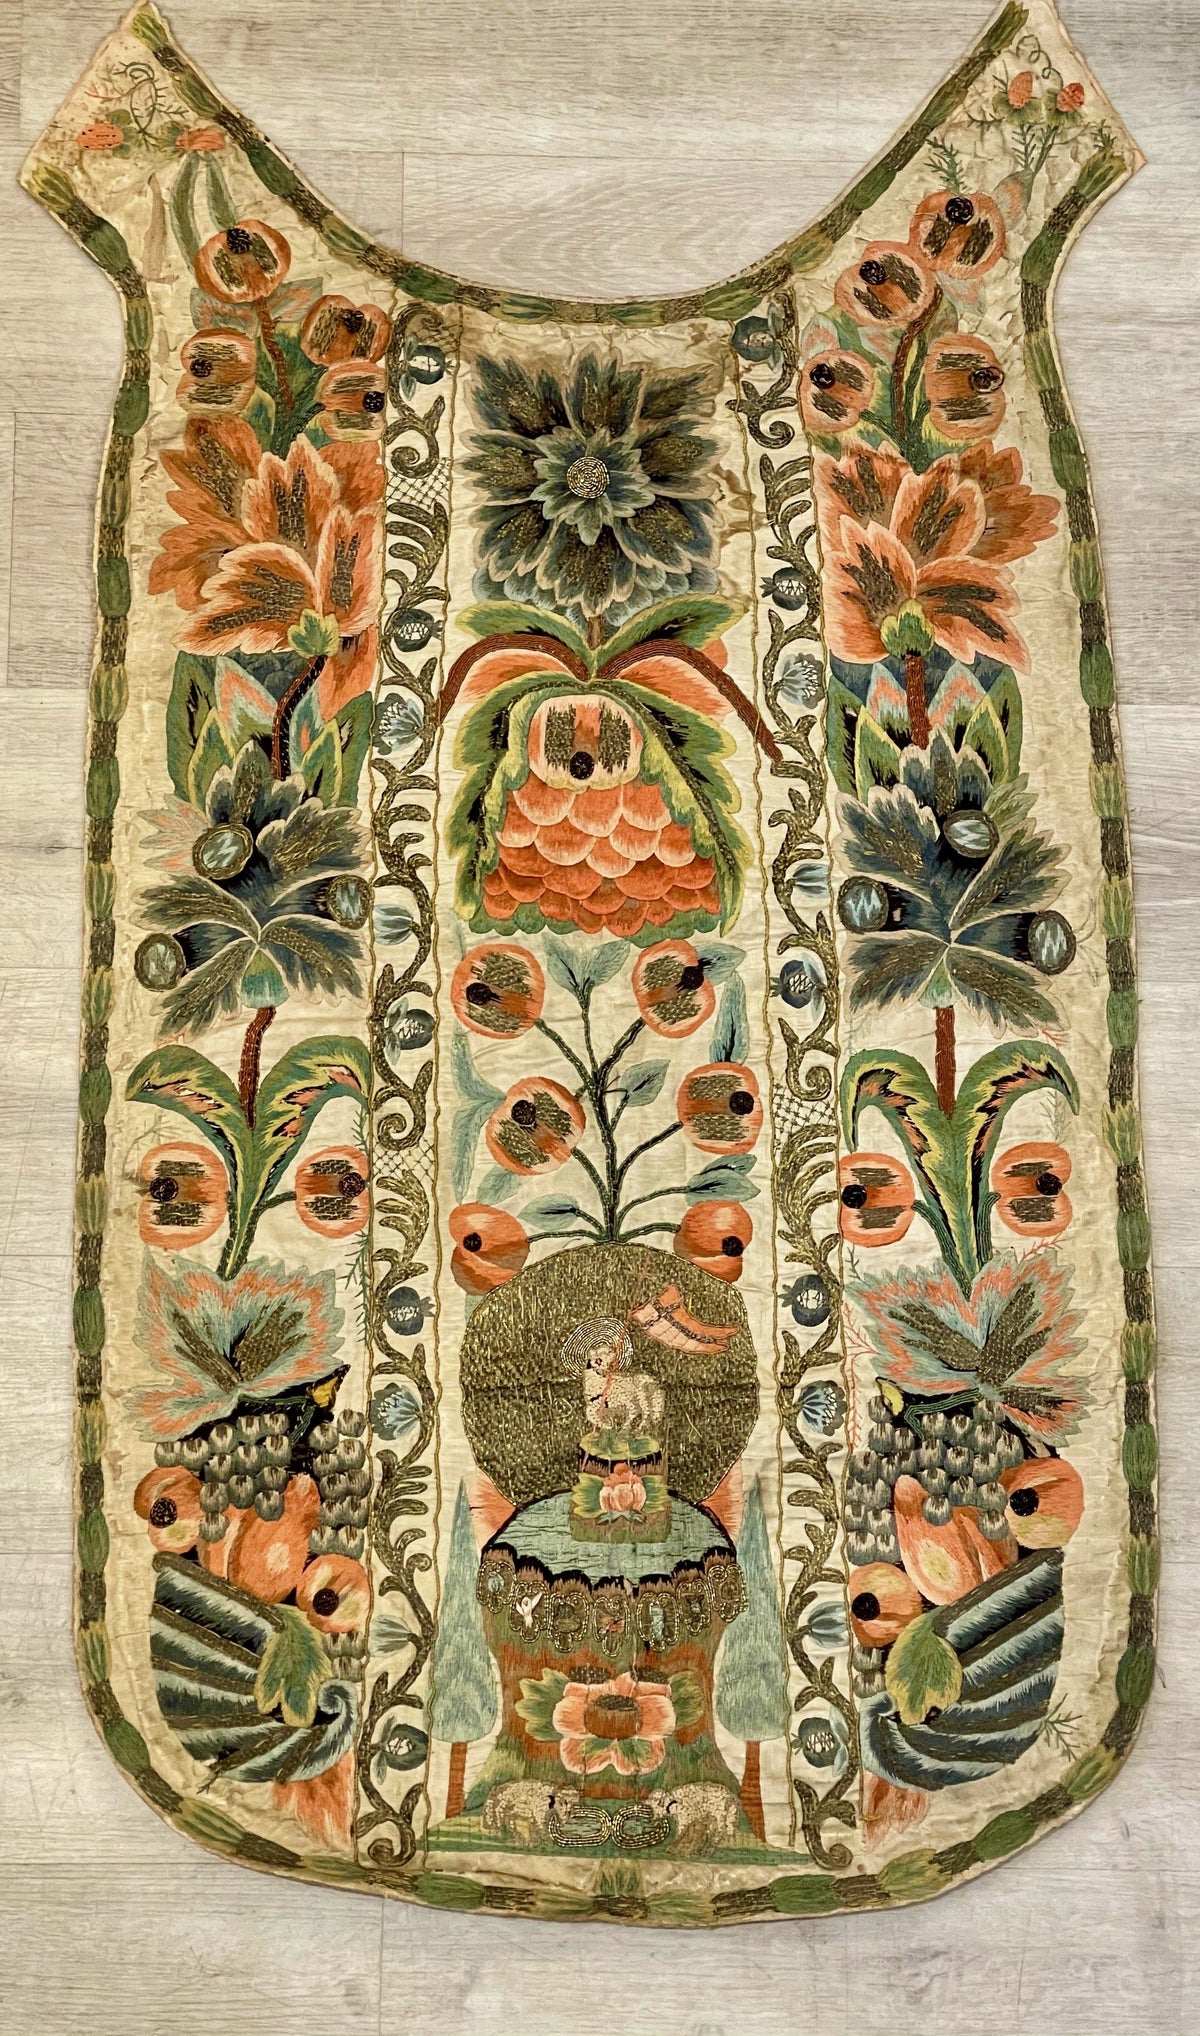 Textile Embroidery - 18TH CENTURY FRENCH HAND-EMBROIDERED CHAUSABLE